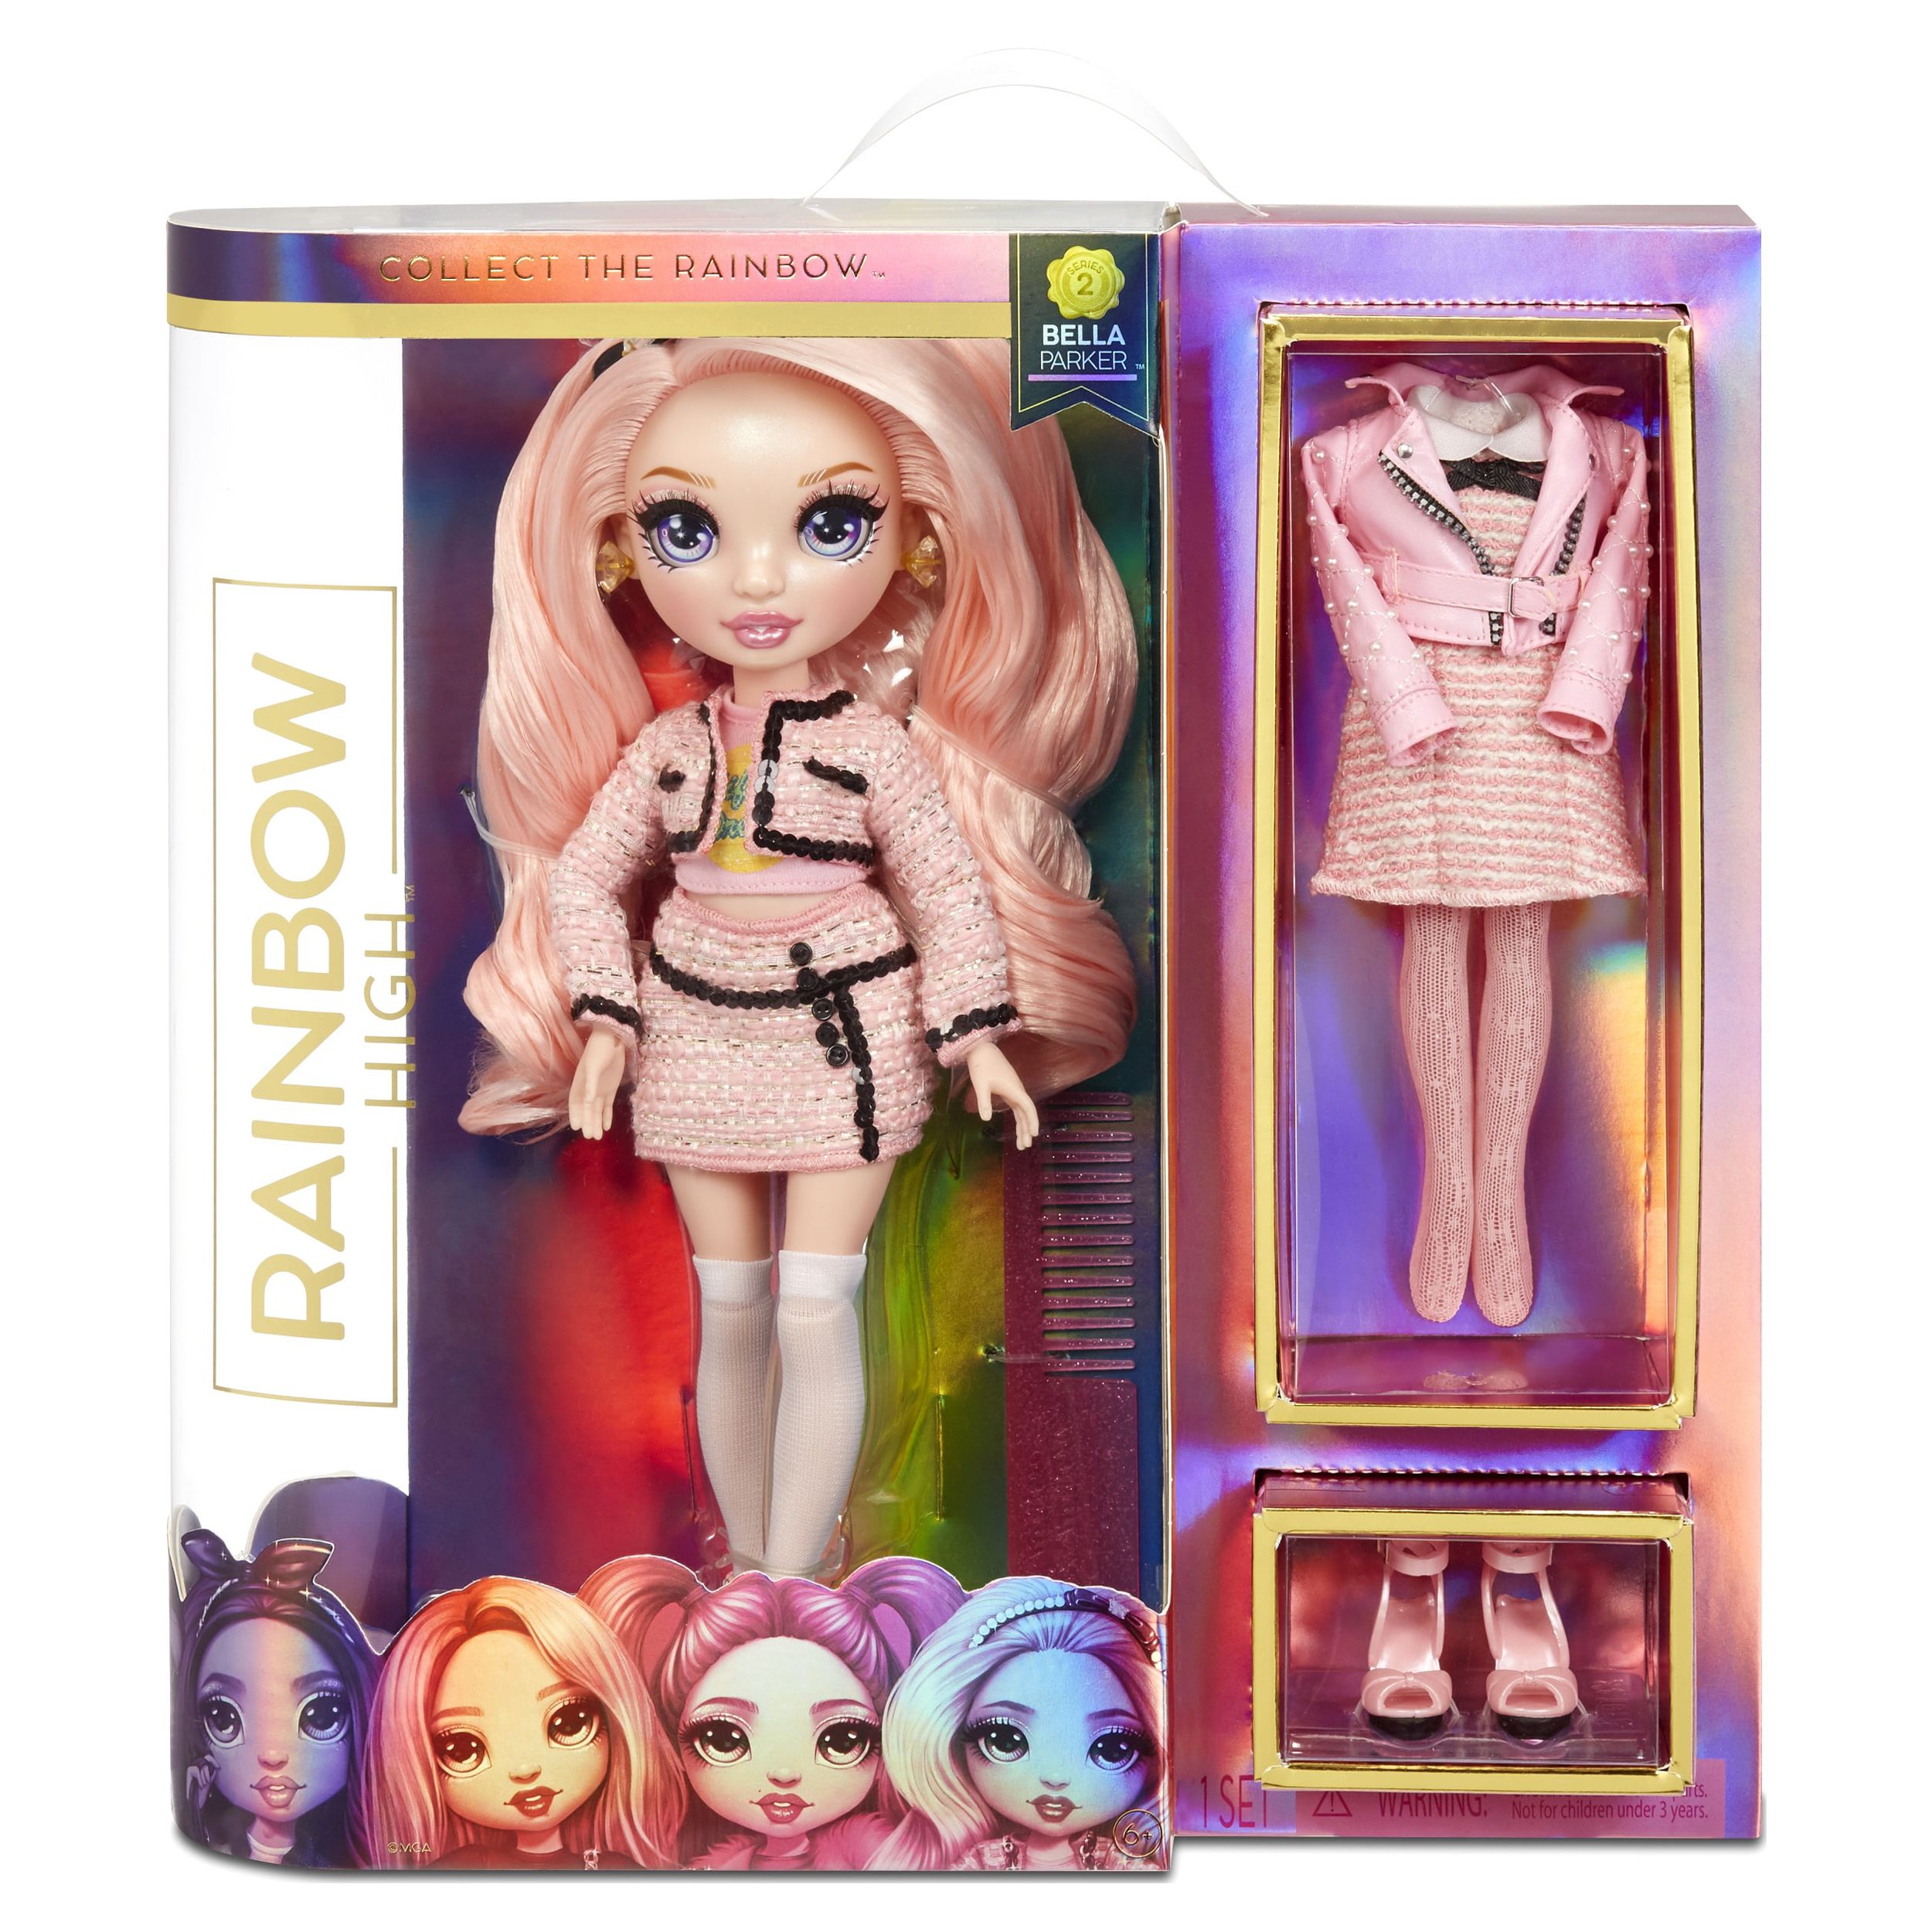 Rainbow High Bella Parker – Pink Fashion Doll with 2 Complete Mix & Match Outfits and Accessories, Toys for Kids 6-12 Years Old - image 1 of 7